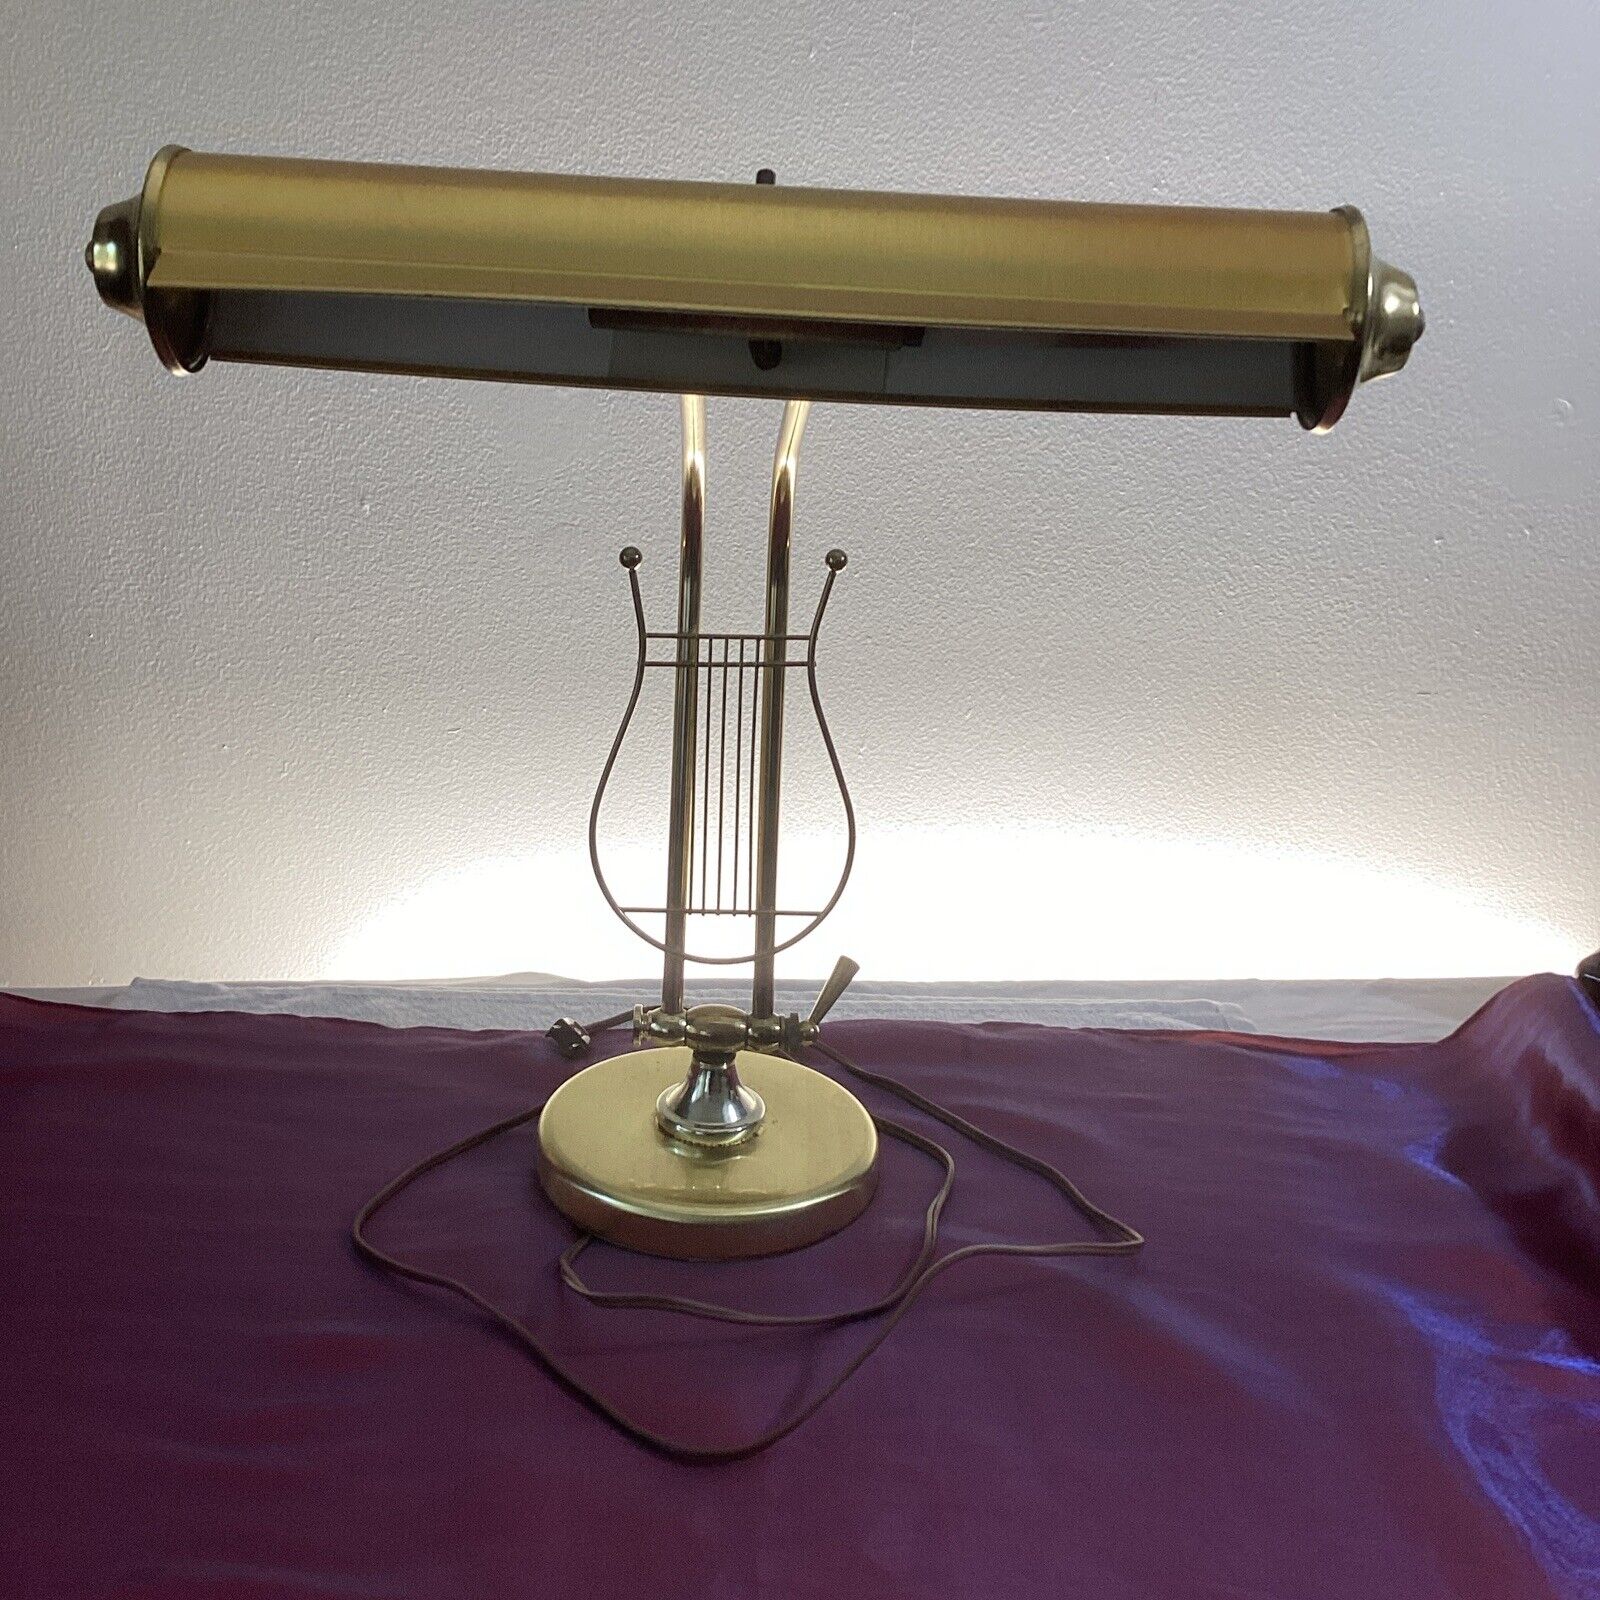 Vintage Polished Brass 18” Dual Bulb Articulated Desk / Piano Lamp TESTED WORKS